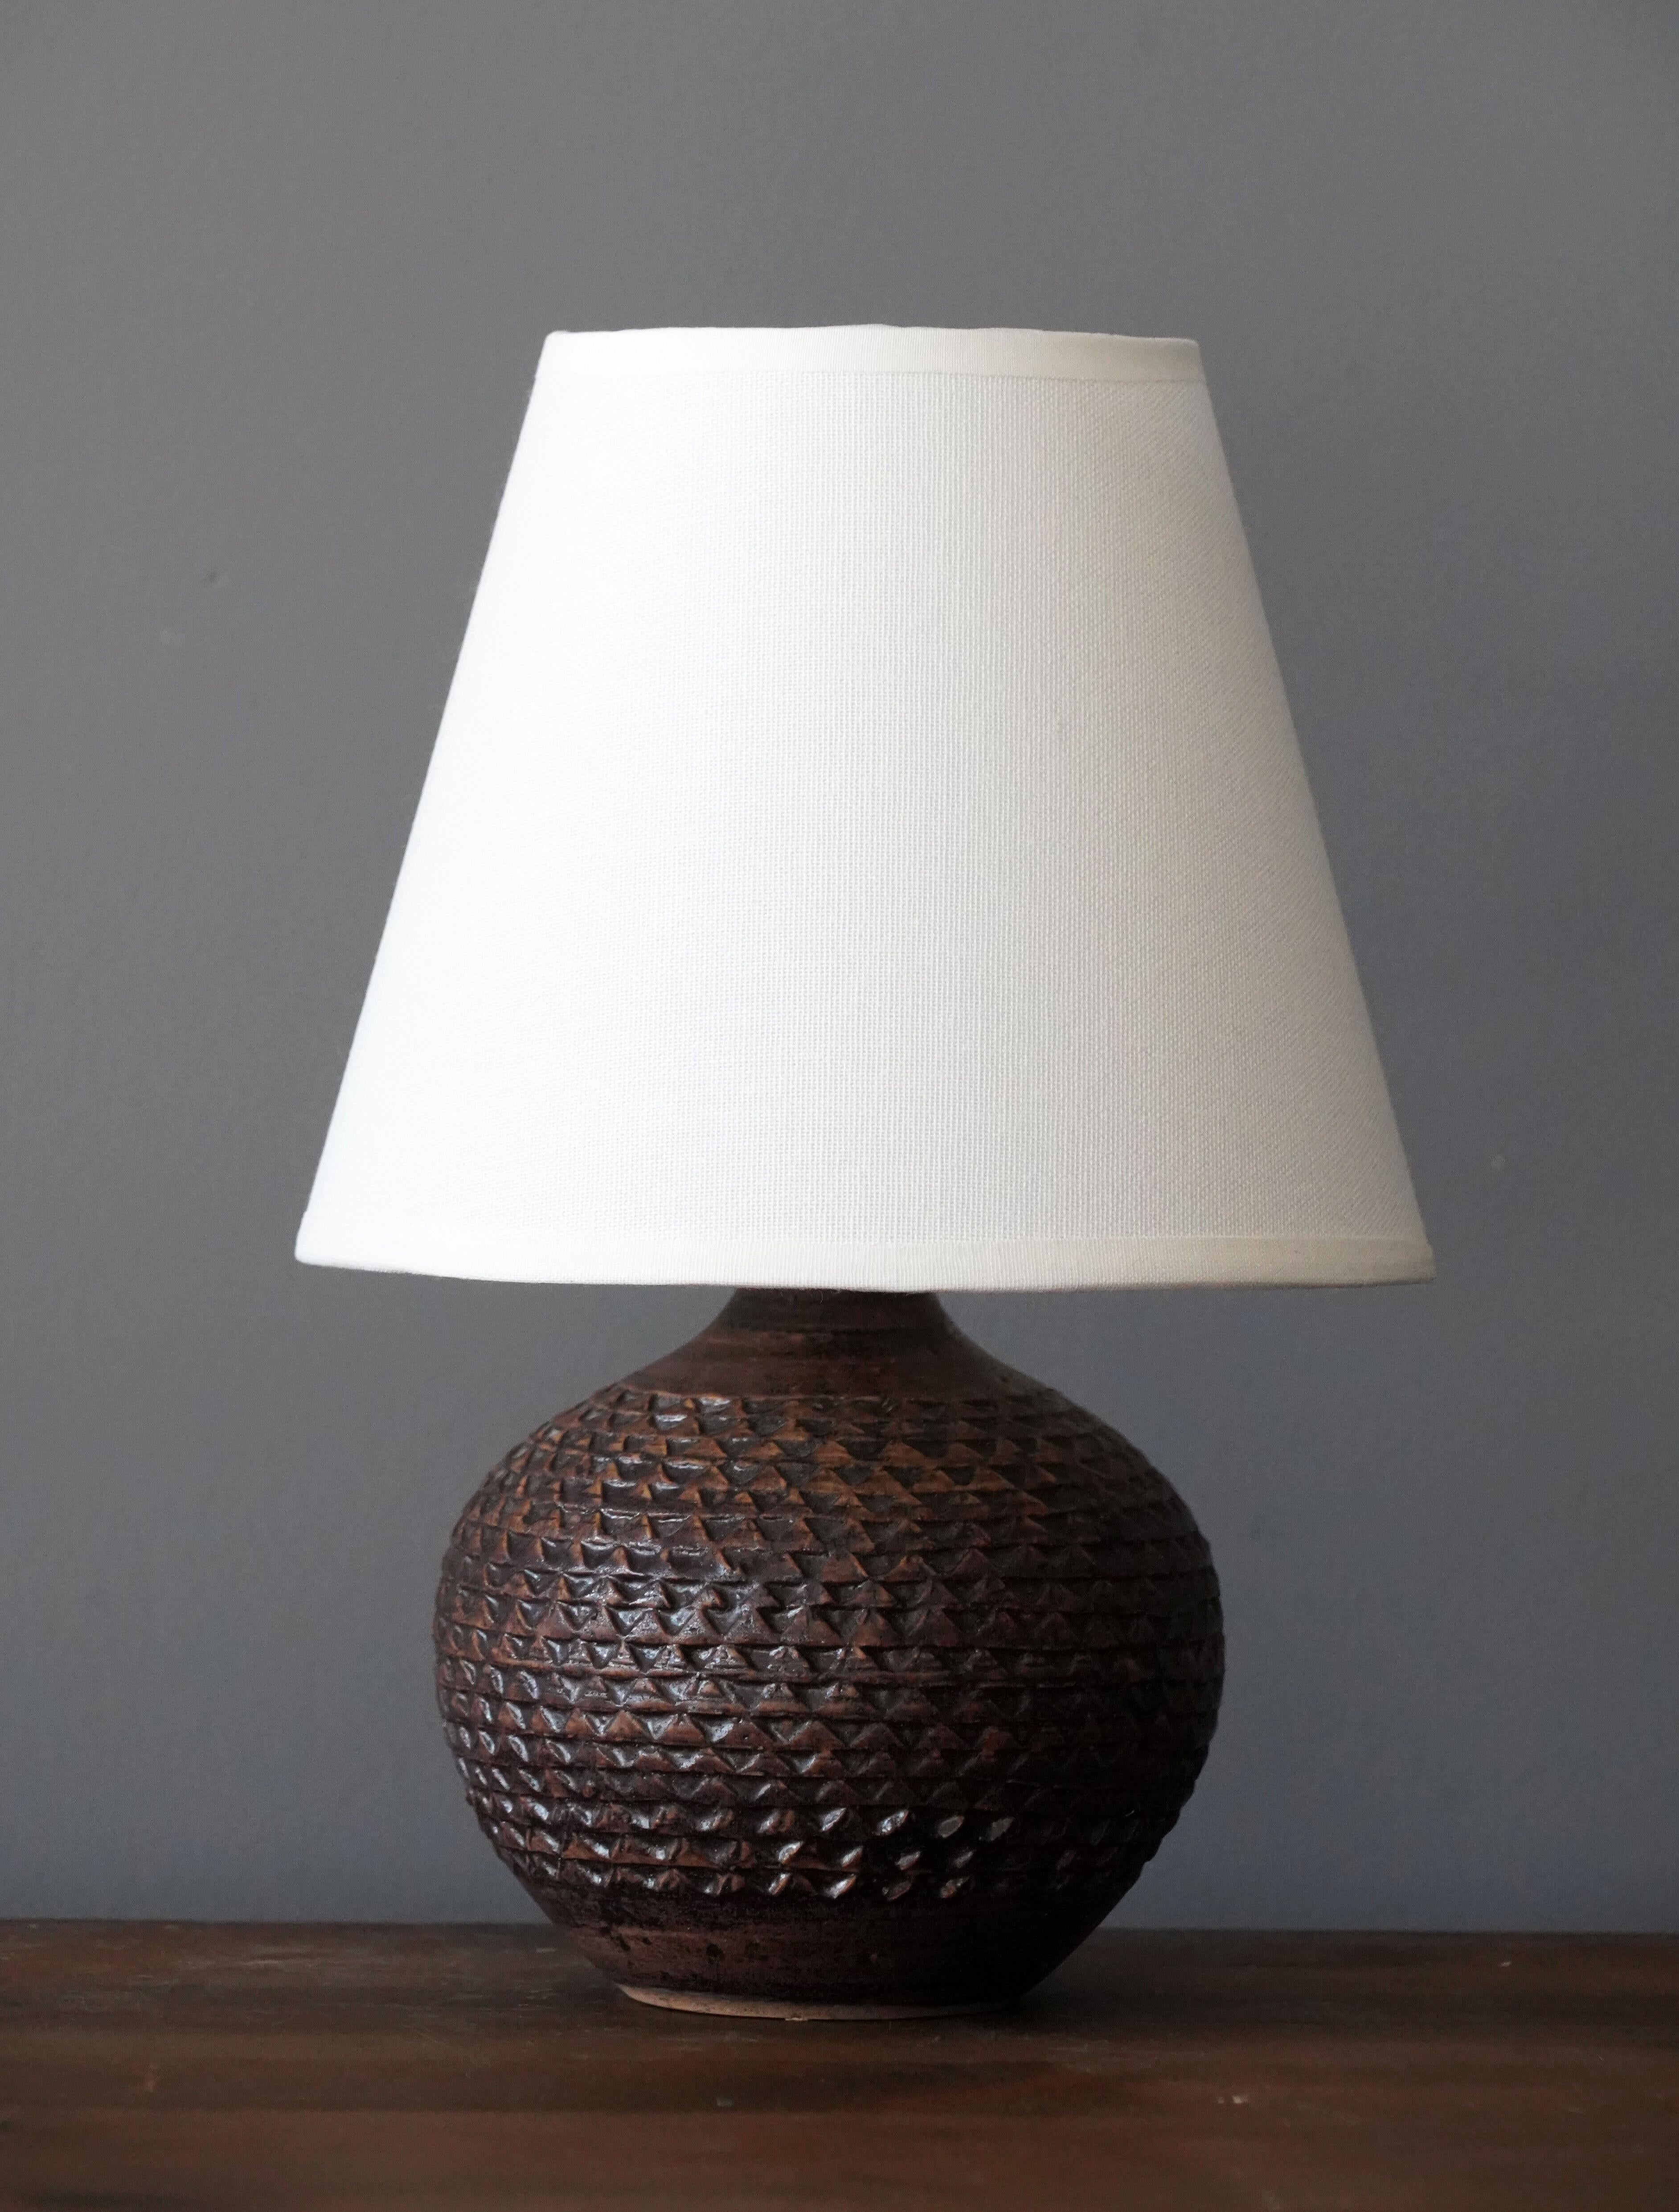 A small table lamp produced and design by unknown Danish studio potter.

Lampshade is attached for reference and are not included in the purchase. Measured without lampshade.

Other ceramicists of the period include Axel Salto, Arne Bang,